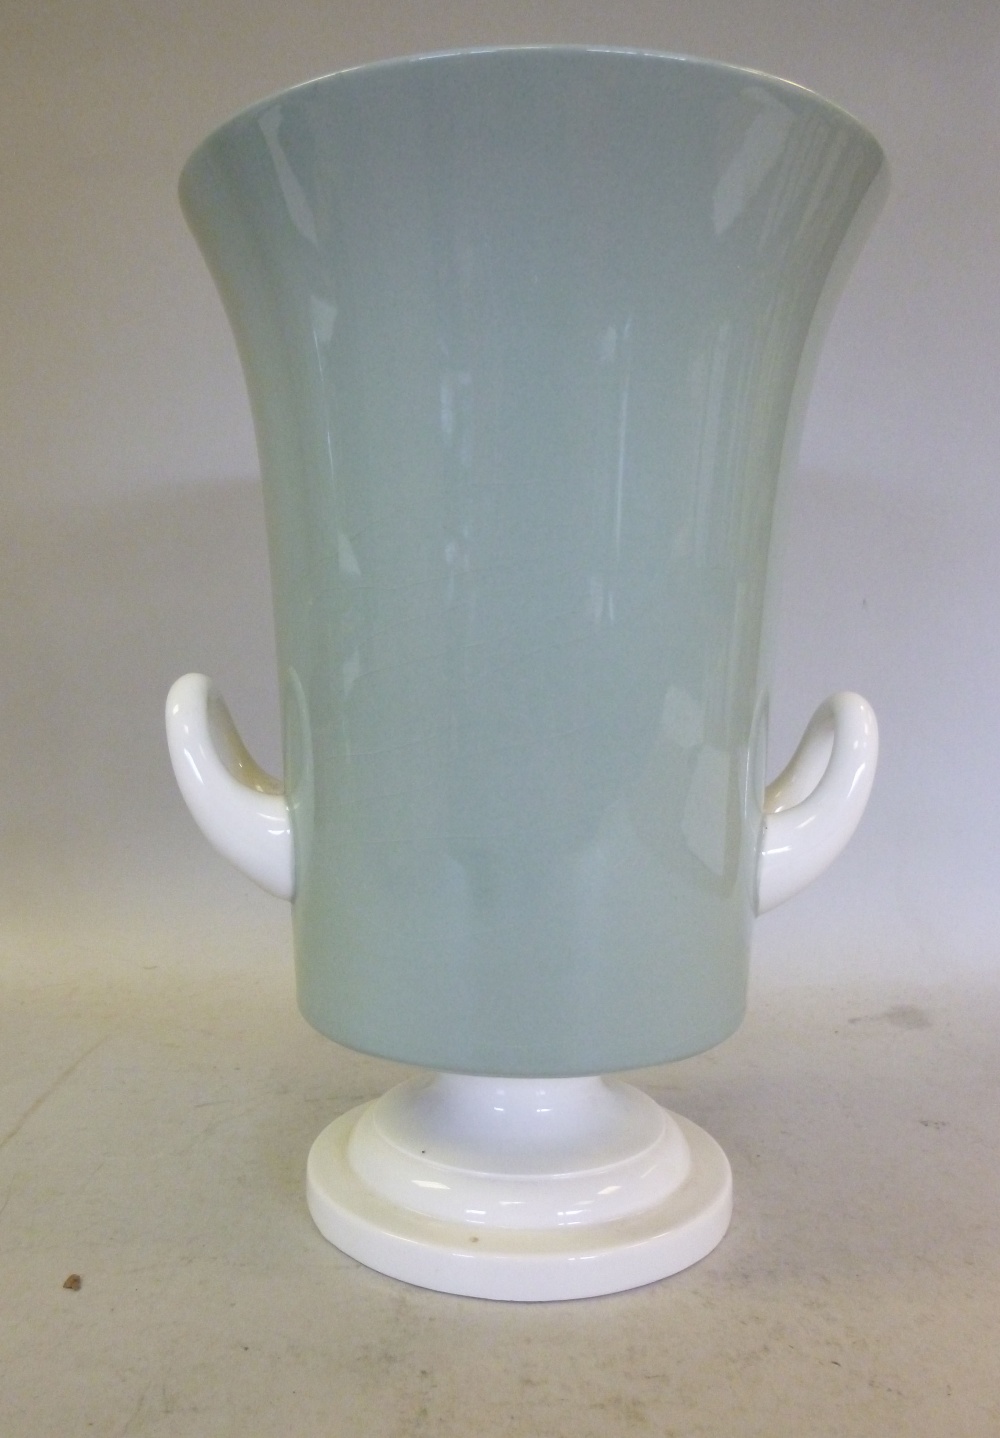 A Keith Murray Wedgwood celadon and ivory glazed pottery vase of tapered form with opposing loop